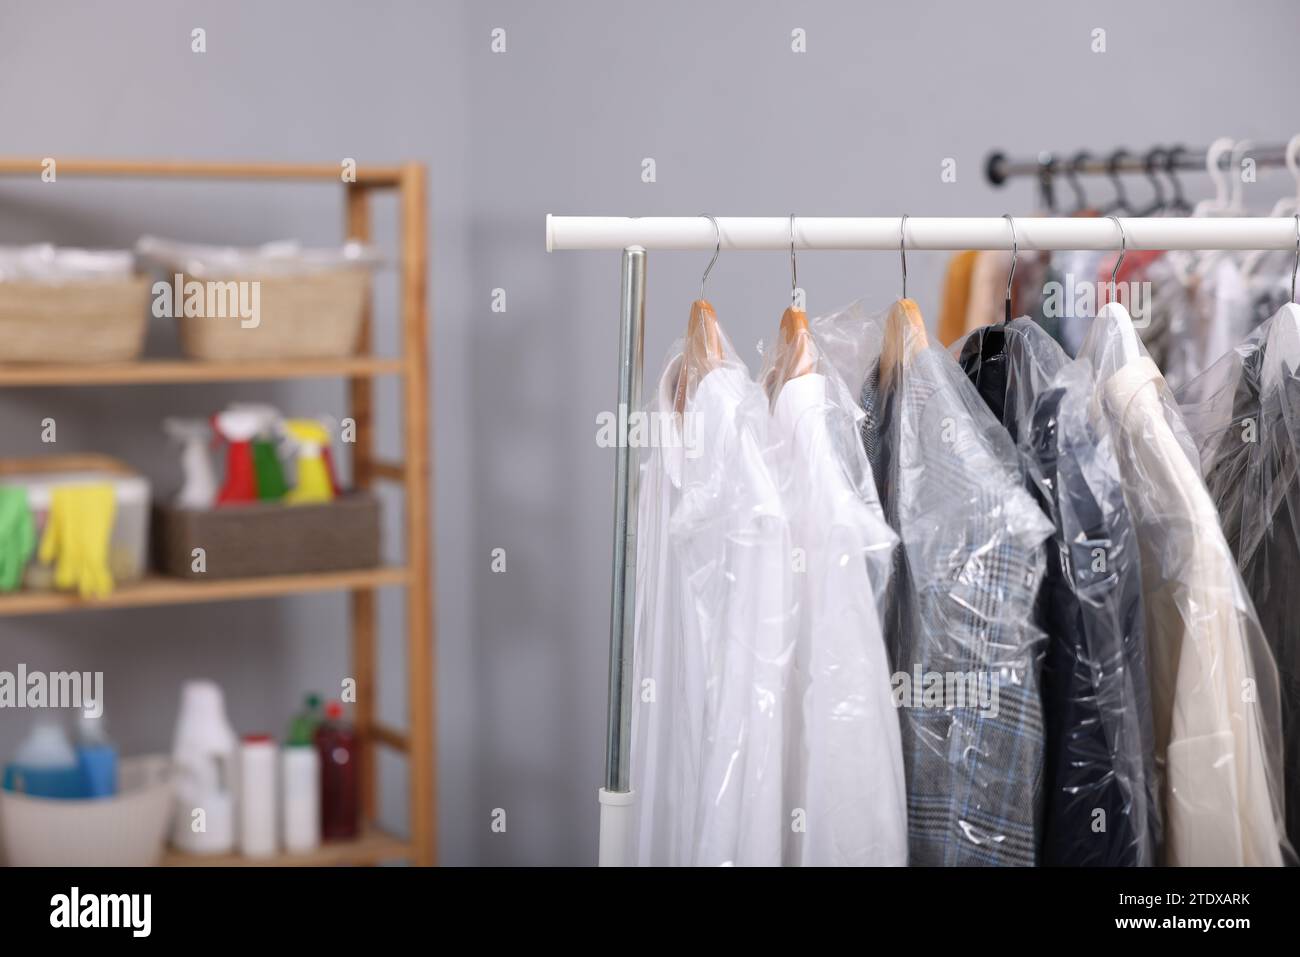 https://c8.alamy.com/comp/2TDXARK/dry-cleaning-service-hangers-with-different-clothes-in-plastic-bags-on-rack-indoors-space-for-text-2TDXARK.jpg